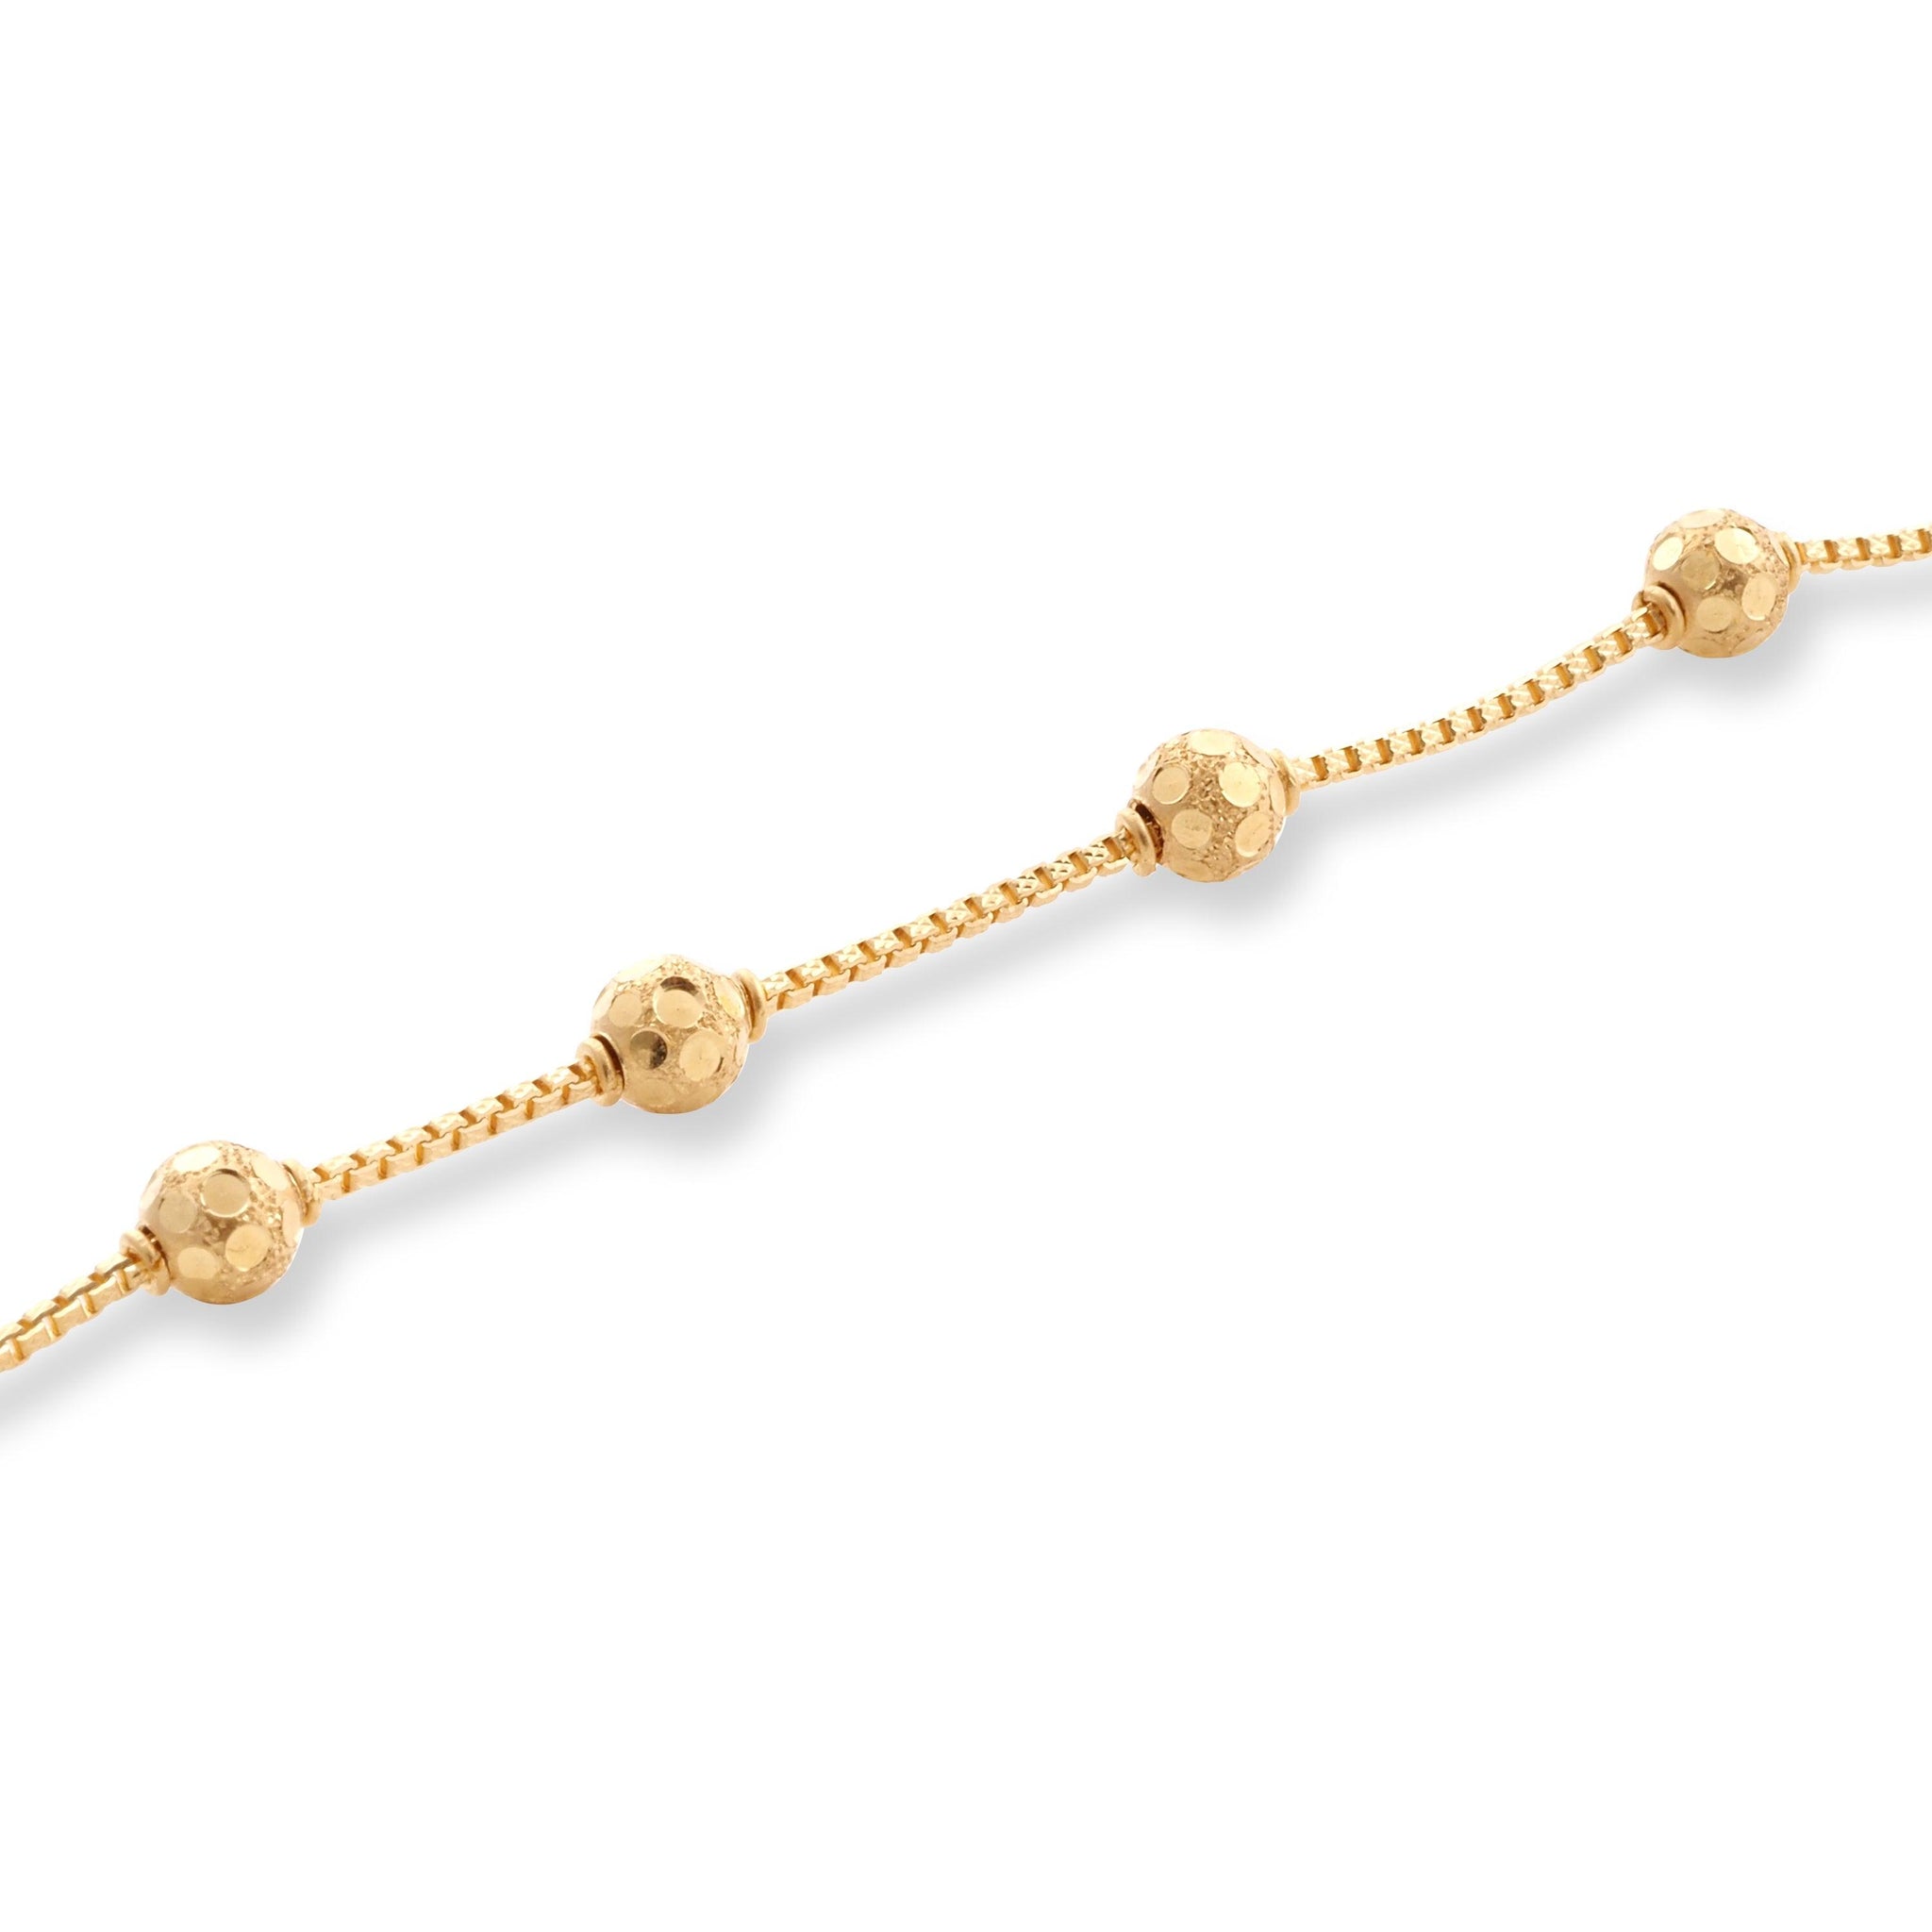 22ct Yellow Gold Bracelet in Diamond Cutting Beads Design with Hook Clasp LBR-8516